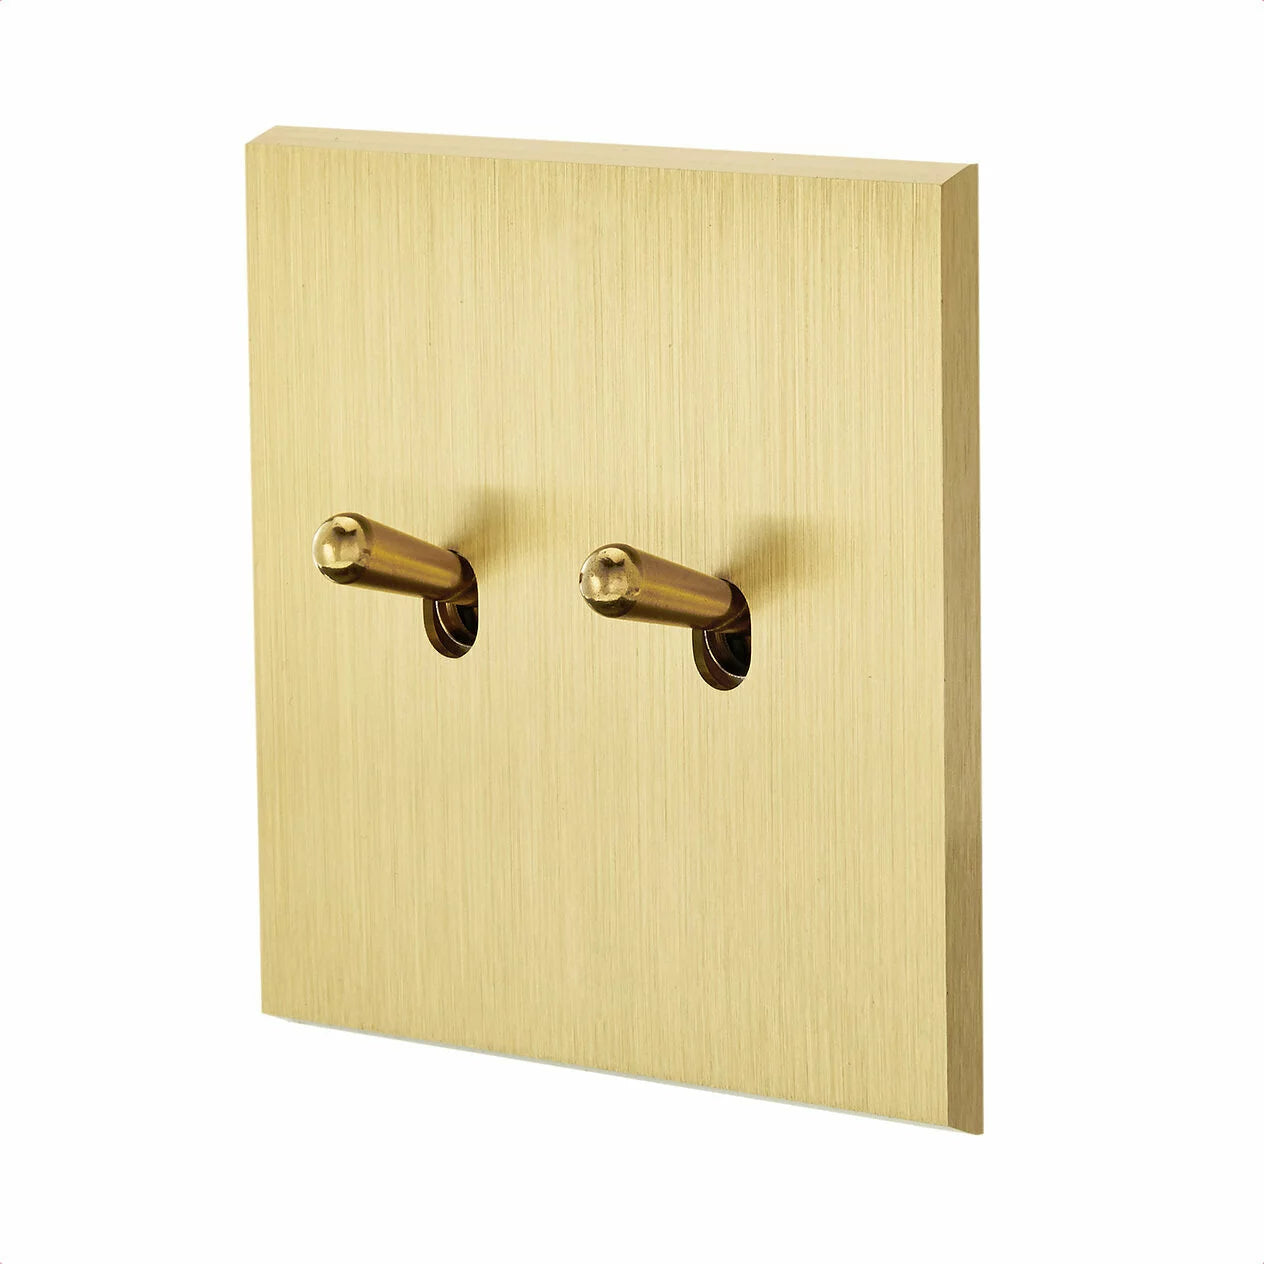 Confidence Collection - Single Cover Plate w Double Two way or Double push or Two way Push Roller Shutter Toggles